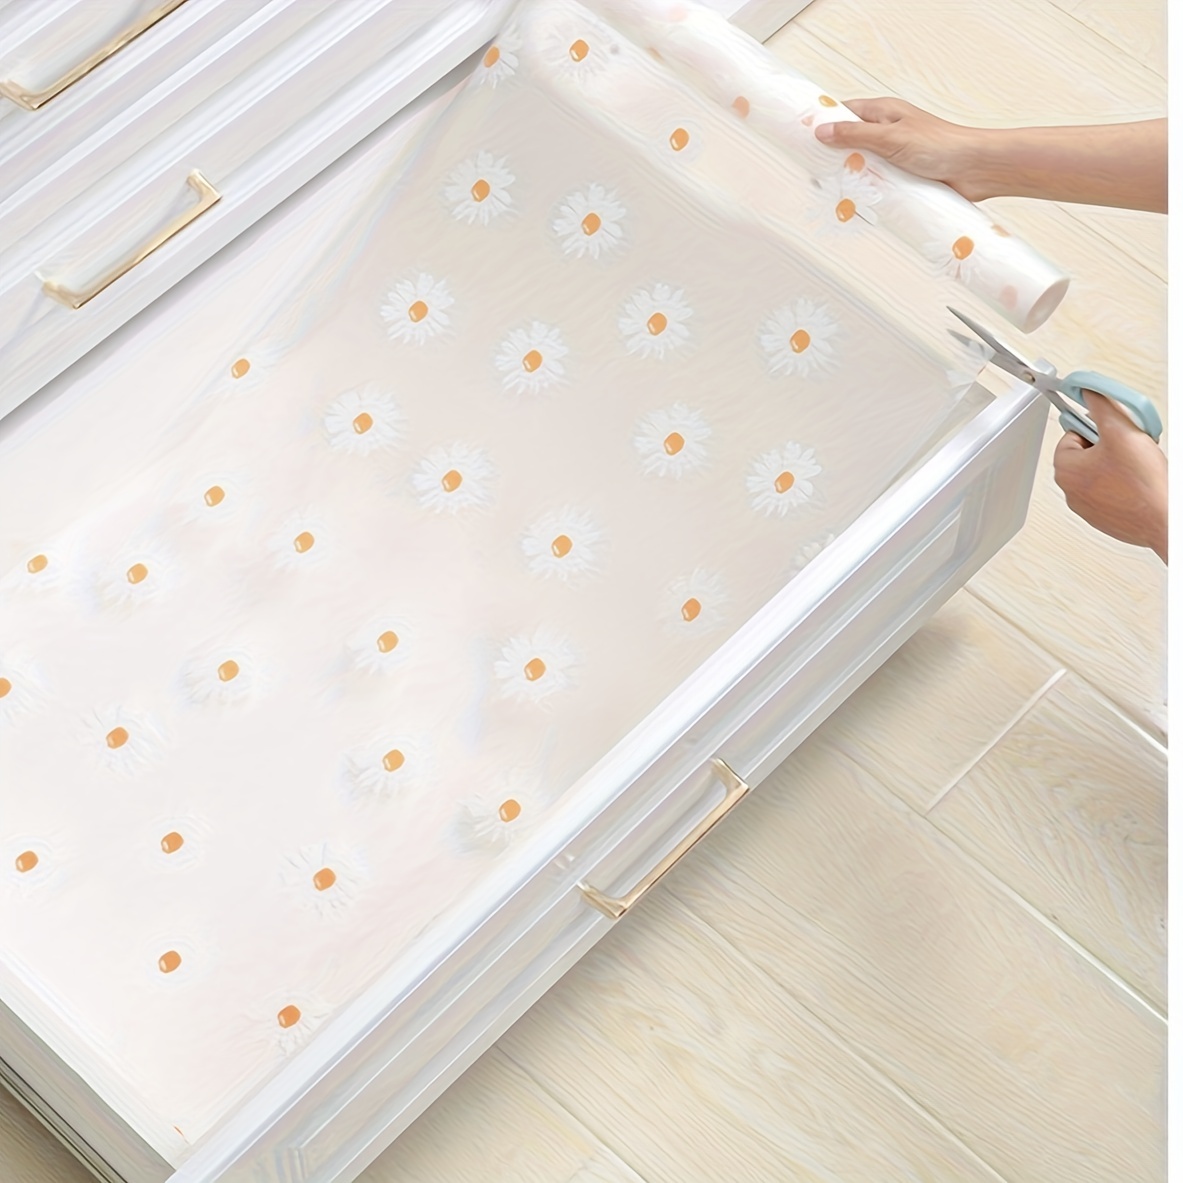 Clear Waterproof Shelf Drawer Liner Cabinet Non Slip Table Cover